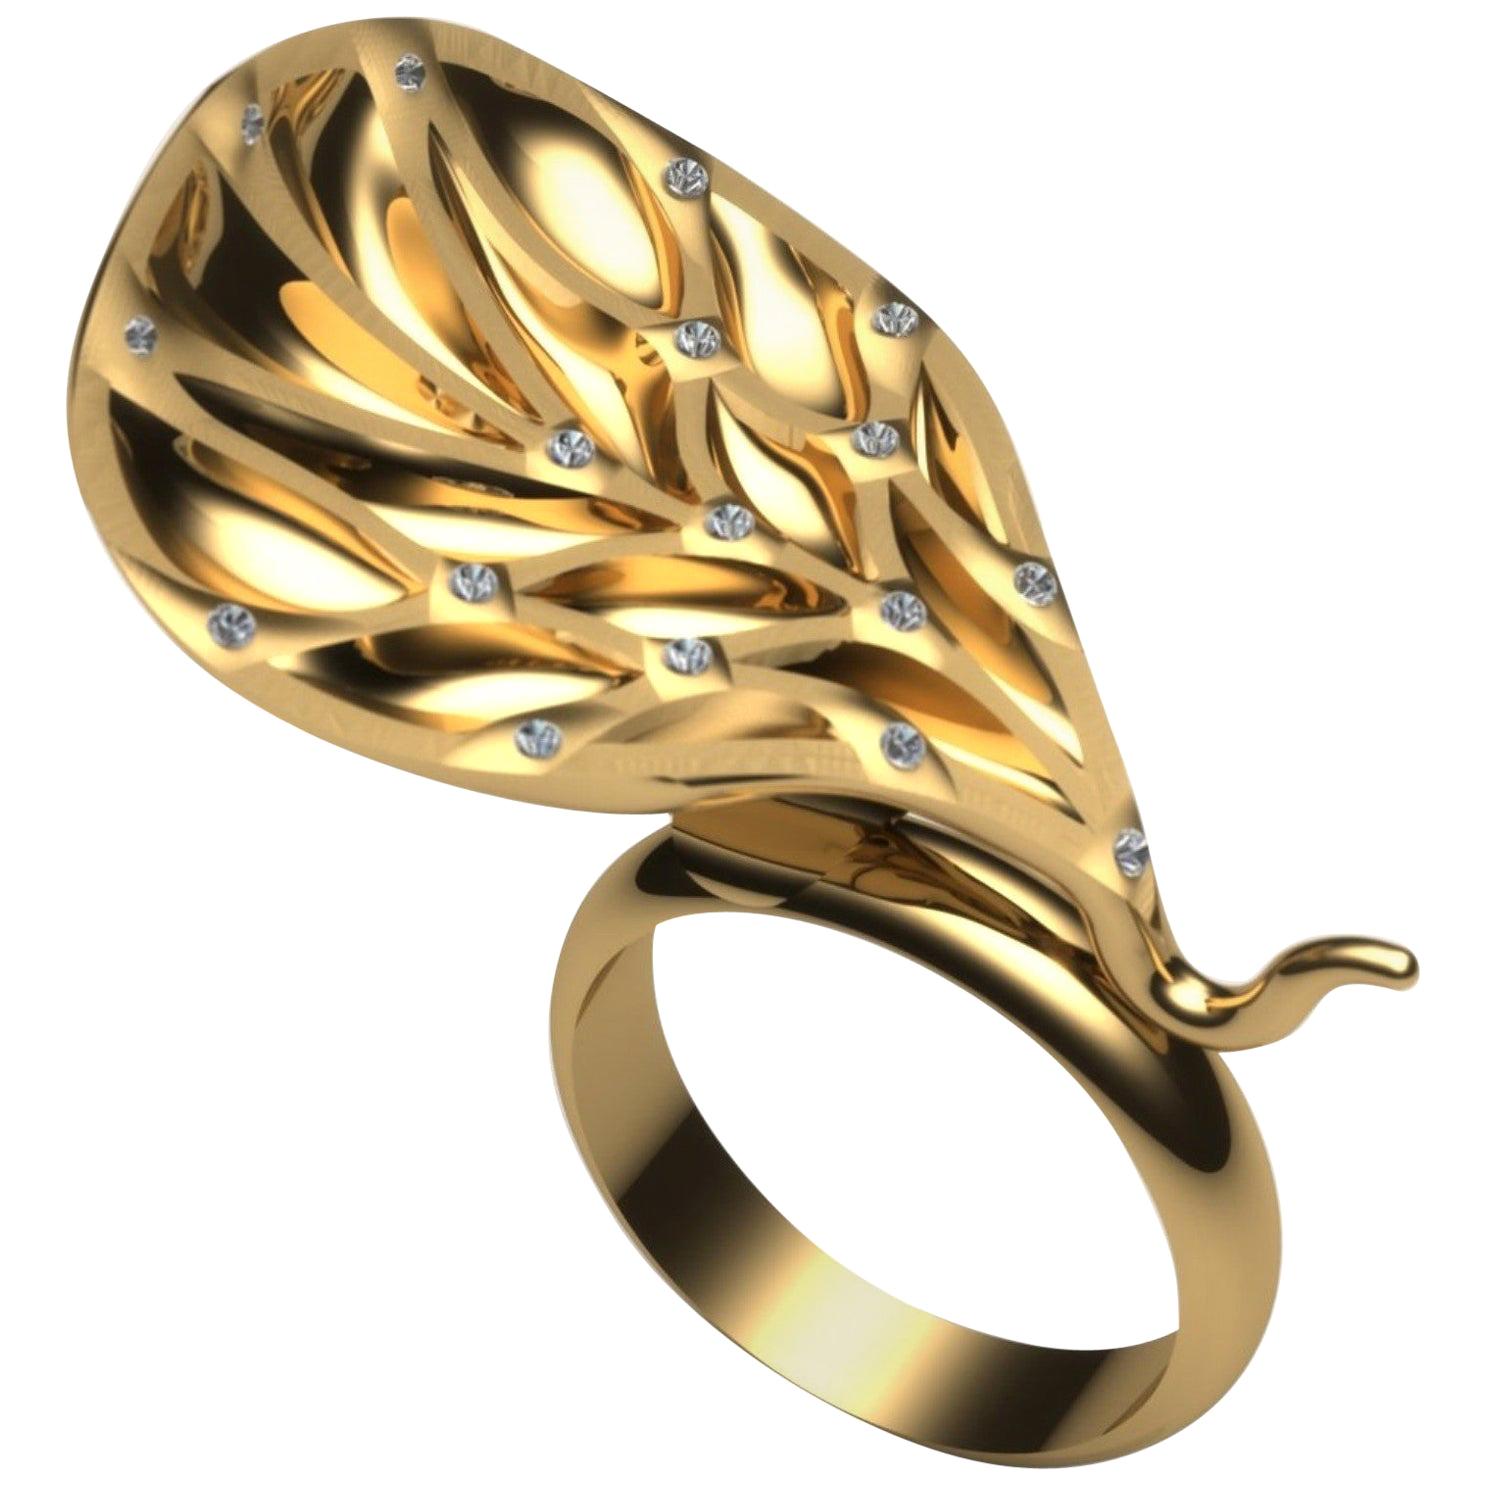 Exclusivity will be Your Fiefdom with One of a Kind Gold Diamond Cocktail Ring For Sale